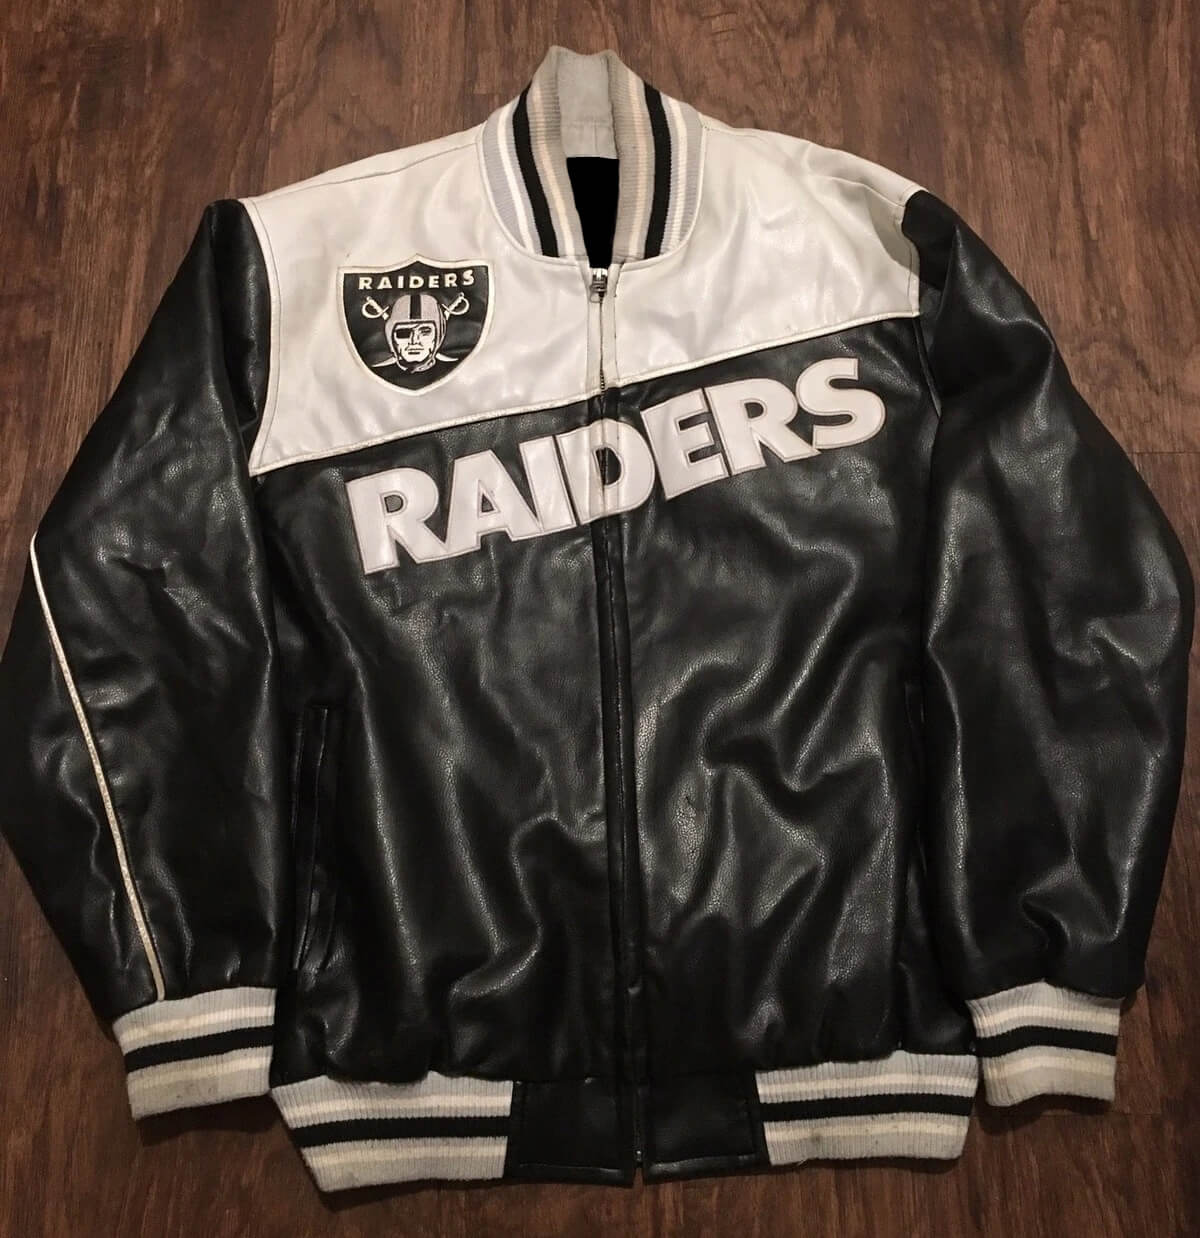 Vintage Los Angeles Raiders Patch Silver and Black with Raiders Logo Used